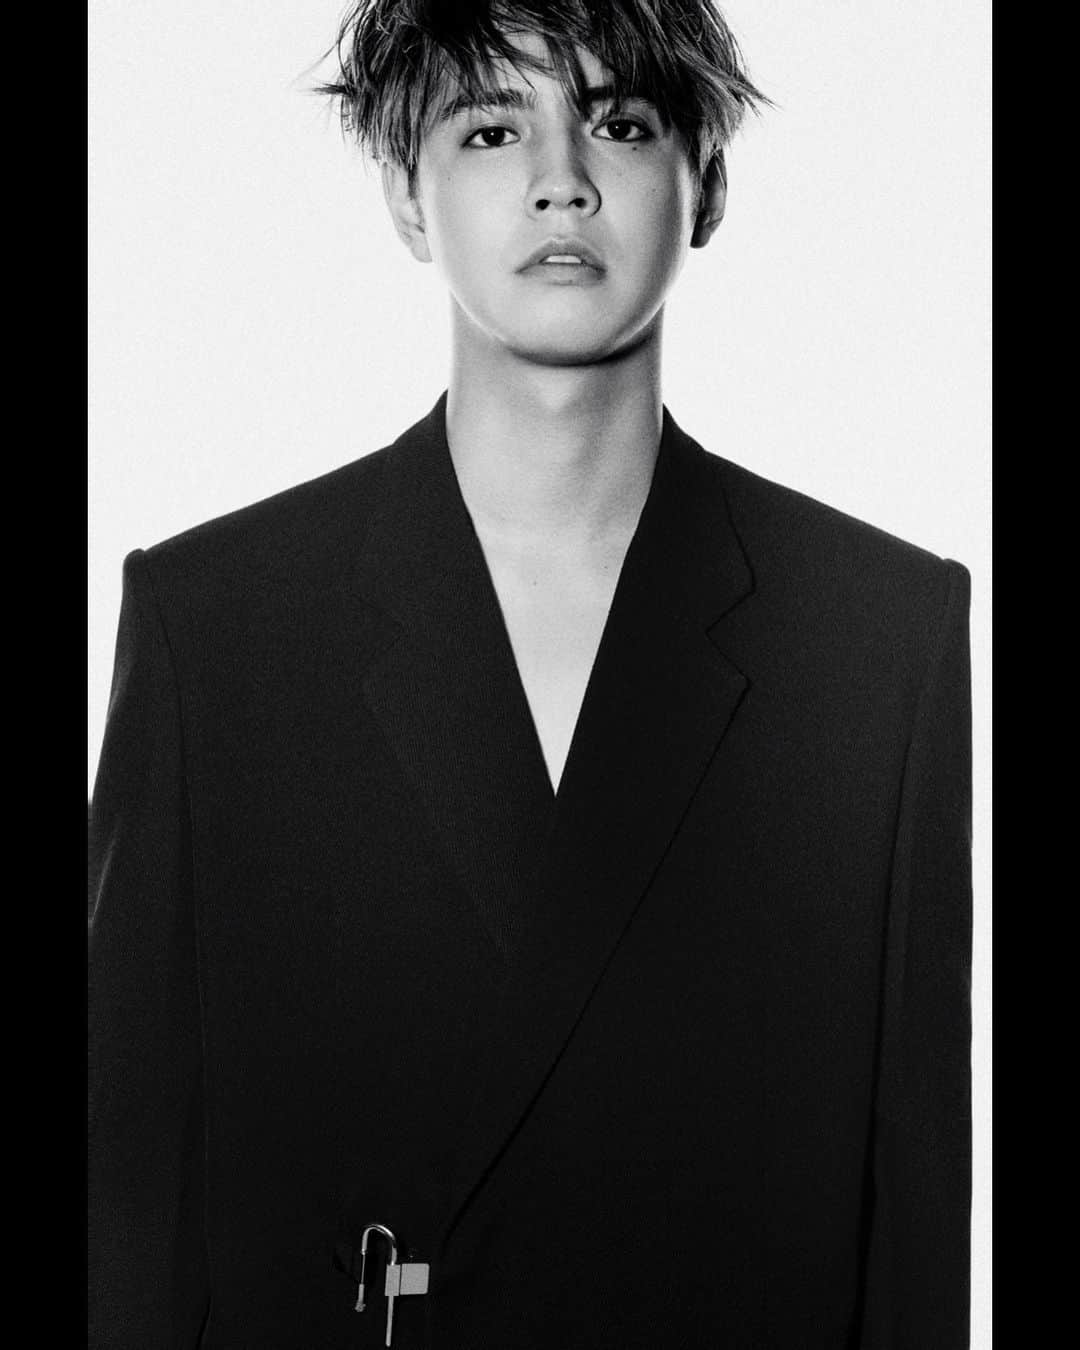 片寄涼太さんのインスタグラム写真 - (片寄涼太Instagram)「I am very honored to have been chosen as the ambassador of Givenchy in Japan. I know that Givenchy has a long history in the fashion industry.  I am very happy that I was chosen at this time when they announced that Matthew M. Williams has become the new Creative Director.  With respect that Givenchy has a long history in making beautiful high-end clothing, I want to do what I can to promote the brand through my position in the entertainment industry of Japan. I am looking forward to seeing how Matthew will incorporate his ideas and design them into Givenchy’s traditional style.  @givenchyofficial  @matthewmwilliams  #Givenchy #givenchyfamily  ------------------ Givenchyの初の日本人アンバサダーとして選んでいただき、とても光栄に思っています。 Givenchyはファッション業界のなかで、とても長い歴史があると思います。 クリエイティブディレクターがMatthew•M•Williams氏に代わる、ブランドがまた生まれ変わるタイミングでのアンバサダーのお話にも大変ありがたく思っています。 Givenchyが長い歴史のなかで最高級の洋服をつくり続けてきたことに尊敬の意を込めて、日本のエンターテイメント業界で僕なりの立場でGivenchyというブランドを広めていきたいと思います。 Givenchyの由緒あるスタイルに、Matthewが彼自身のアイデアやデザインをどうやって融合させるかをとても楽しみにしています。」2月15日 11時04分 - ryota_katayose__official